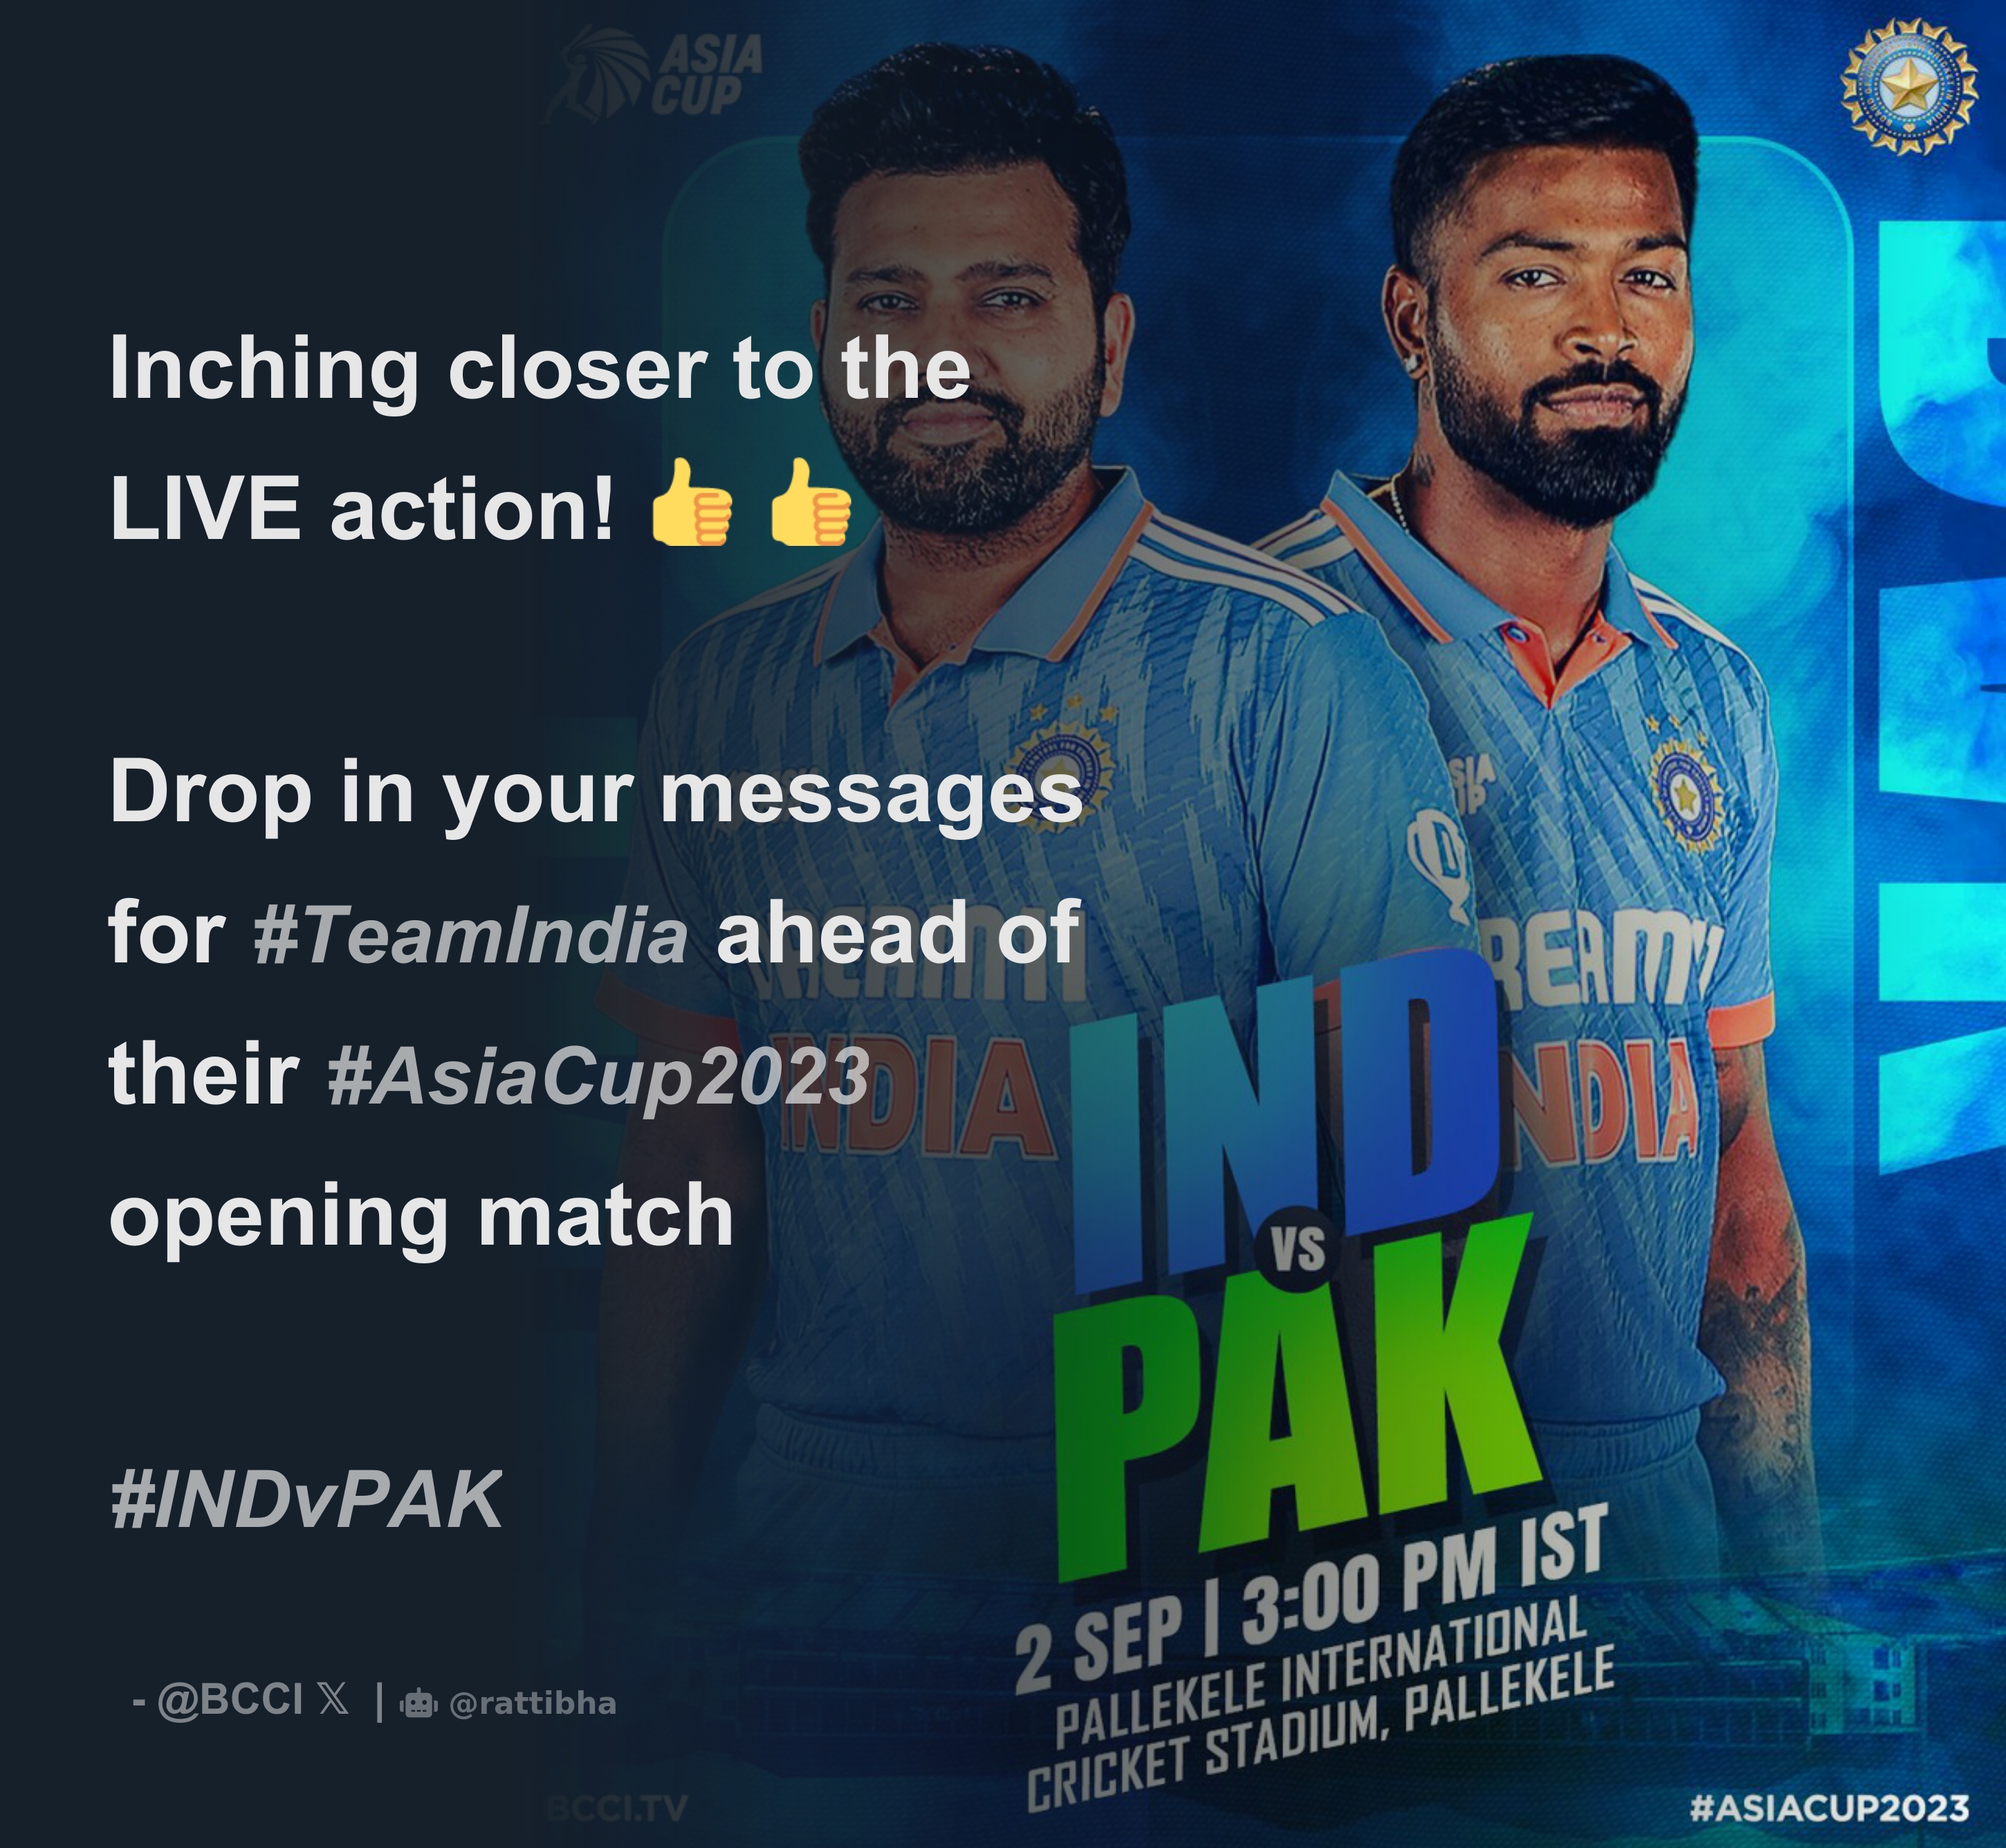 Inching closer to the LIVE action! 👍 👍 Drop in your messages for #TeamIndia ahead of their #AsiaCup2023 opening match #INDvPAK - Thread from BCCIBCCI